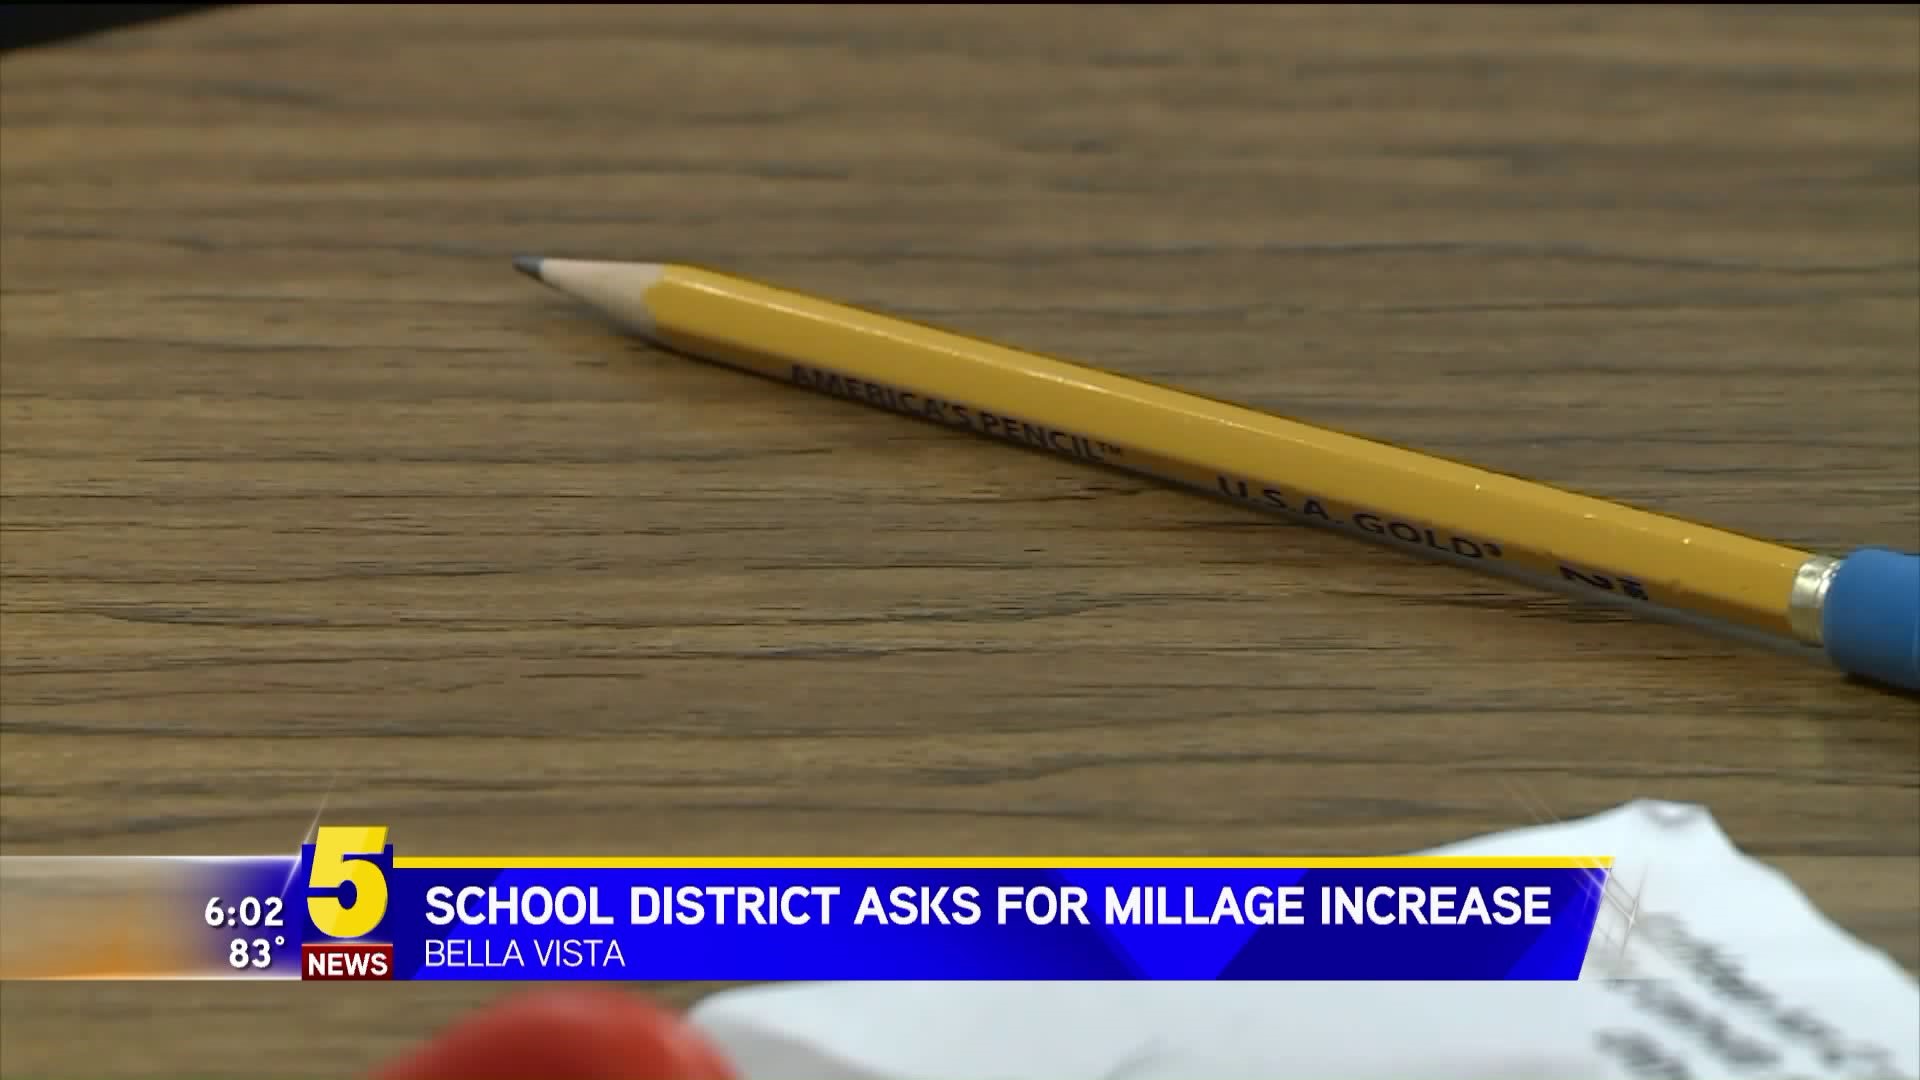 School District Asks For Millage Increase